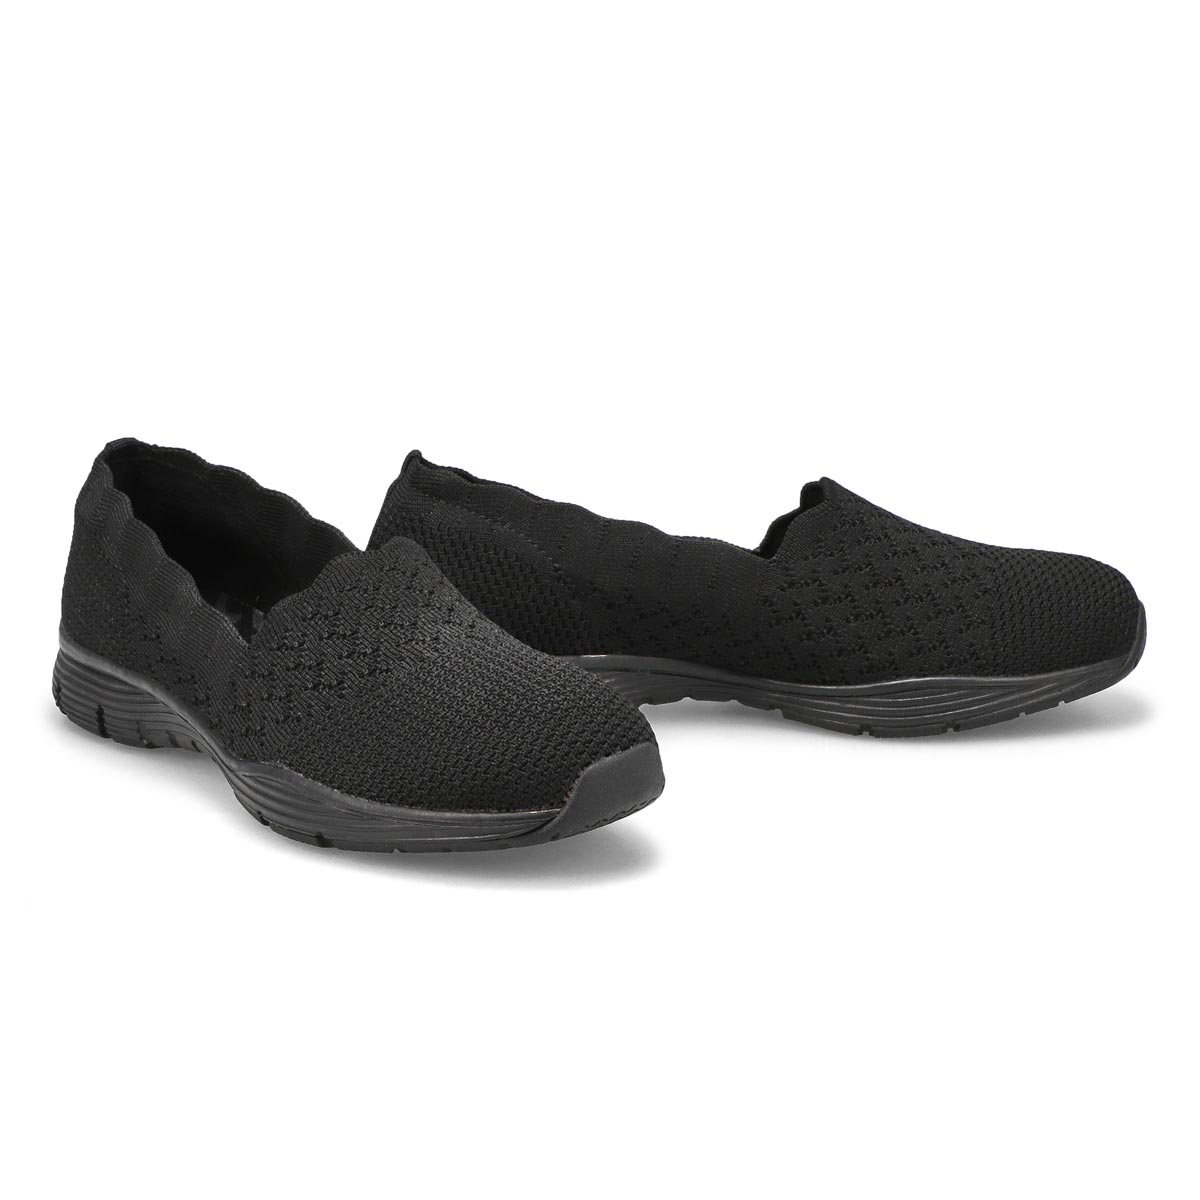 Exchangeable Supposed to enter Skechers Women's Seager Stat Shoe - Black/Bla | SoftMoc USA